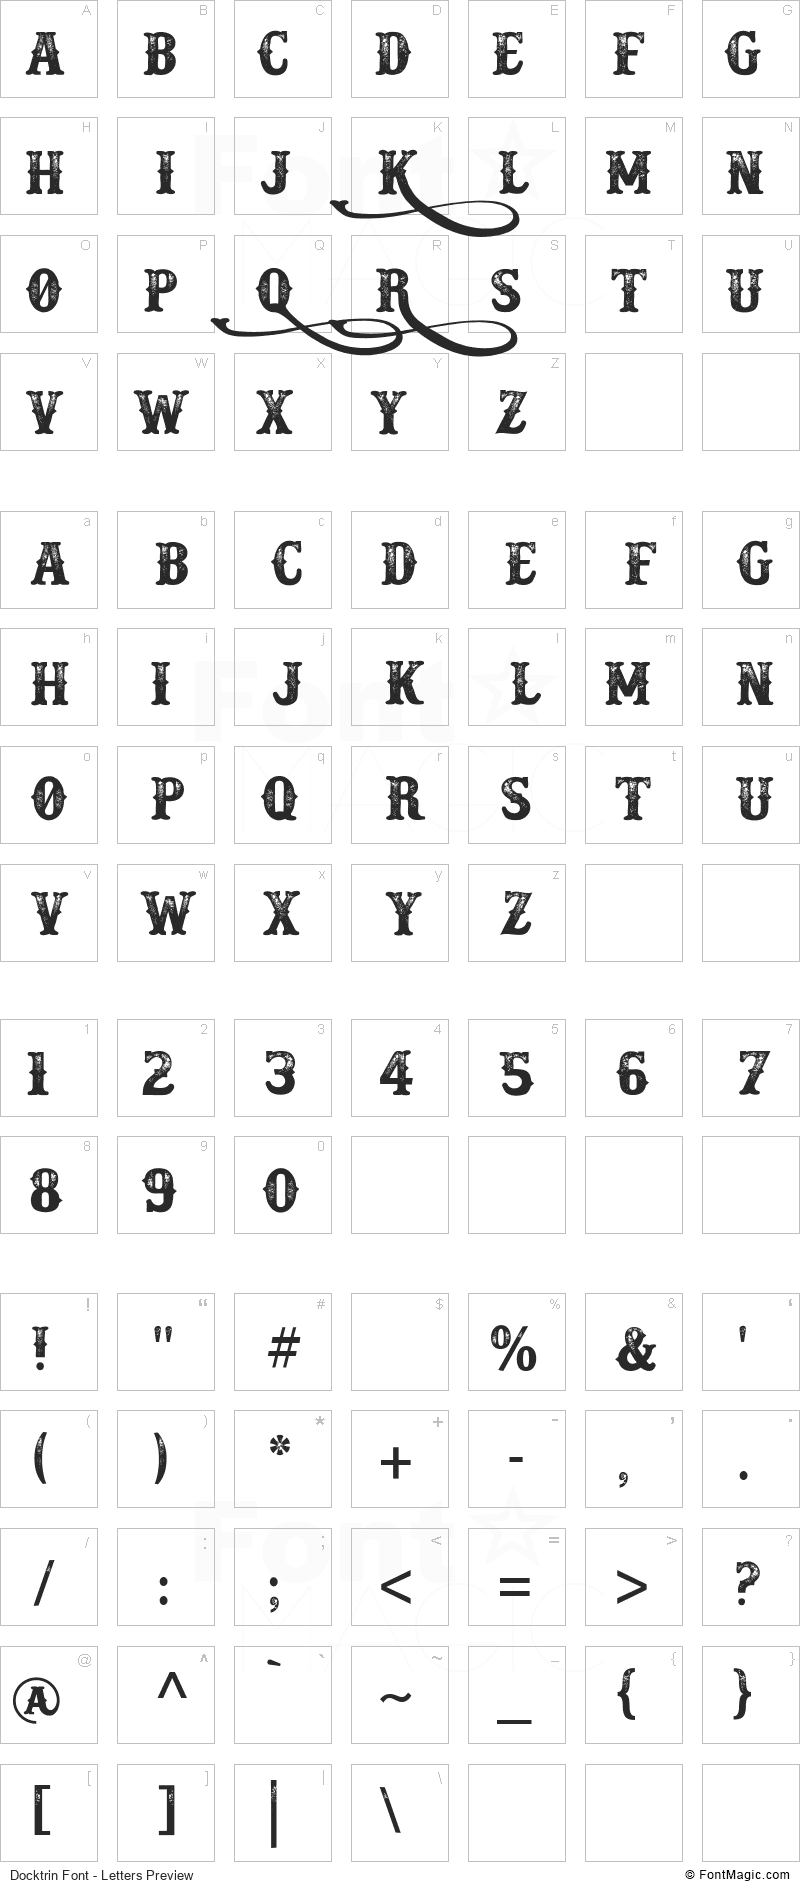 Docktrin Font - All Latters Preview Chart